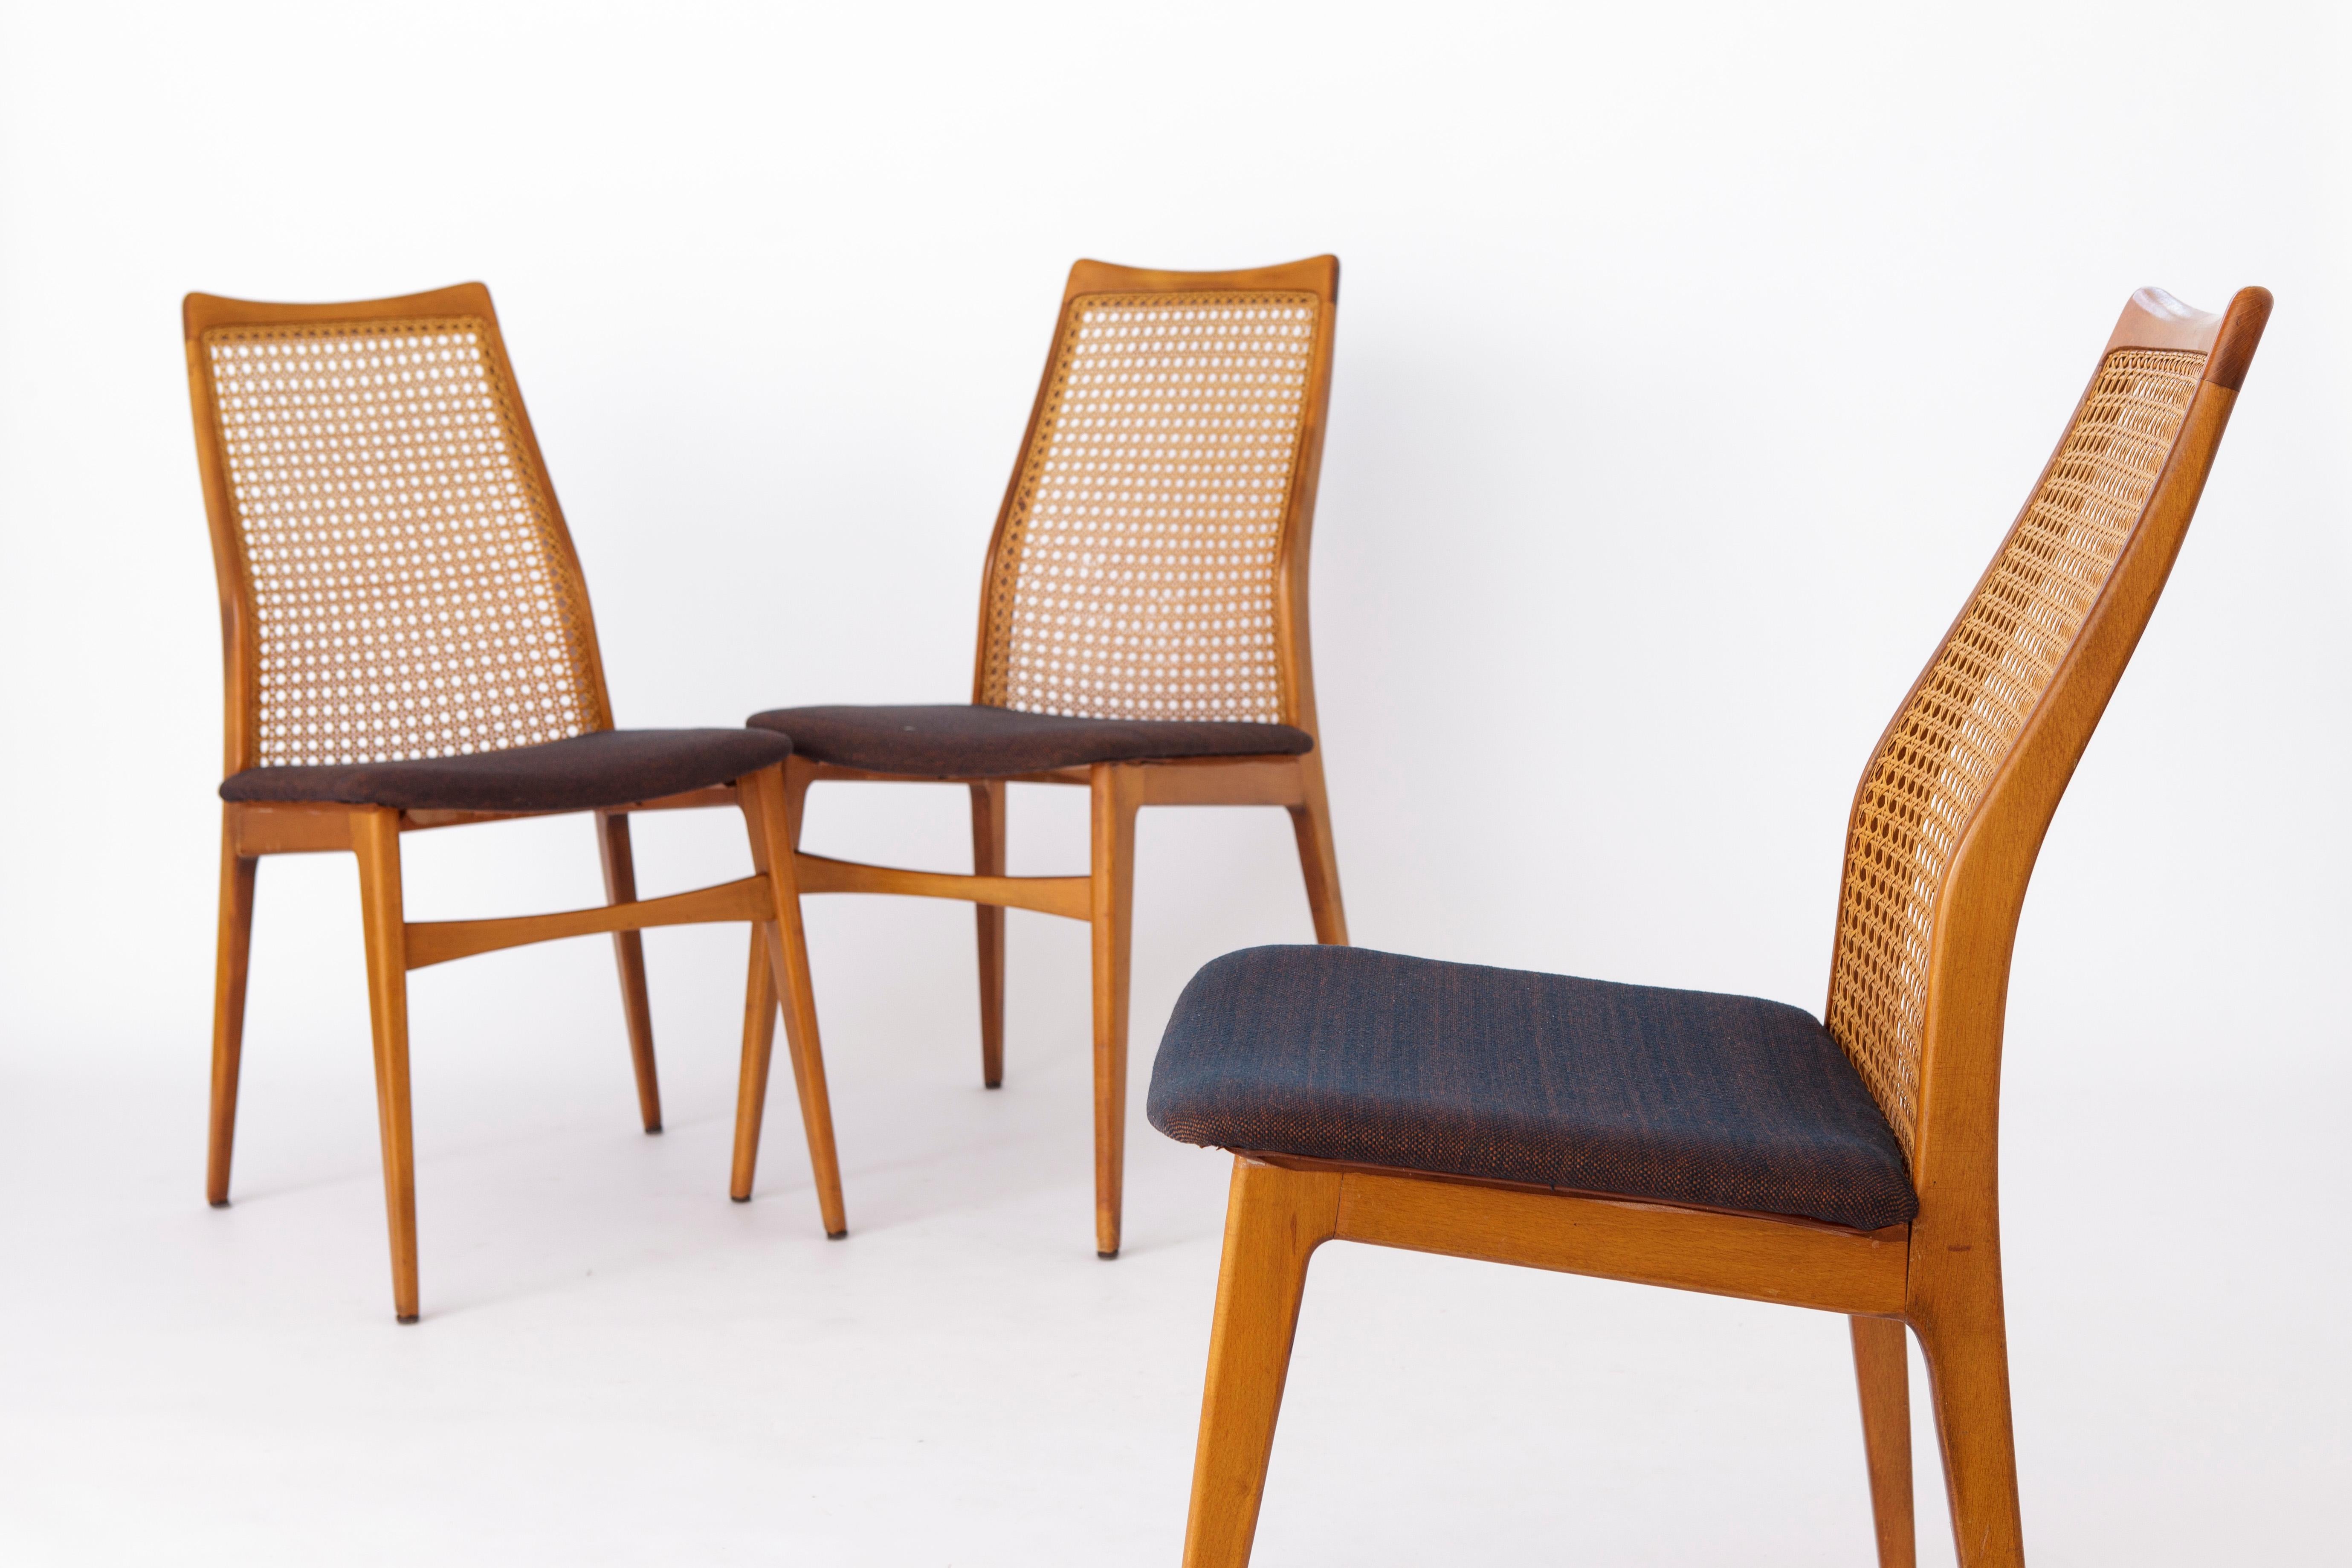 Set of 3 Vintage Chairs by German manufacturer Wilhelm Benze.
Production period: 1960s. 
Displayed price is for 2 chairs. 

Good vintage condition. Dyed beech wood chair frames. 
Seats are reupholstered. 
The seats are glued and not screwed.
In